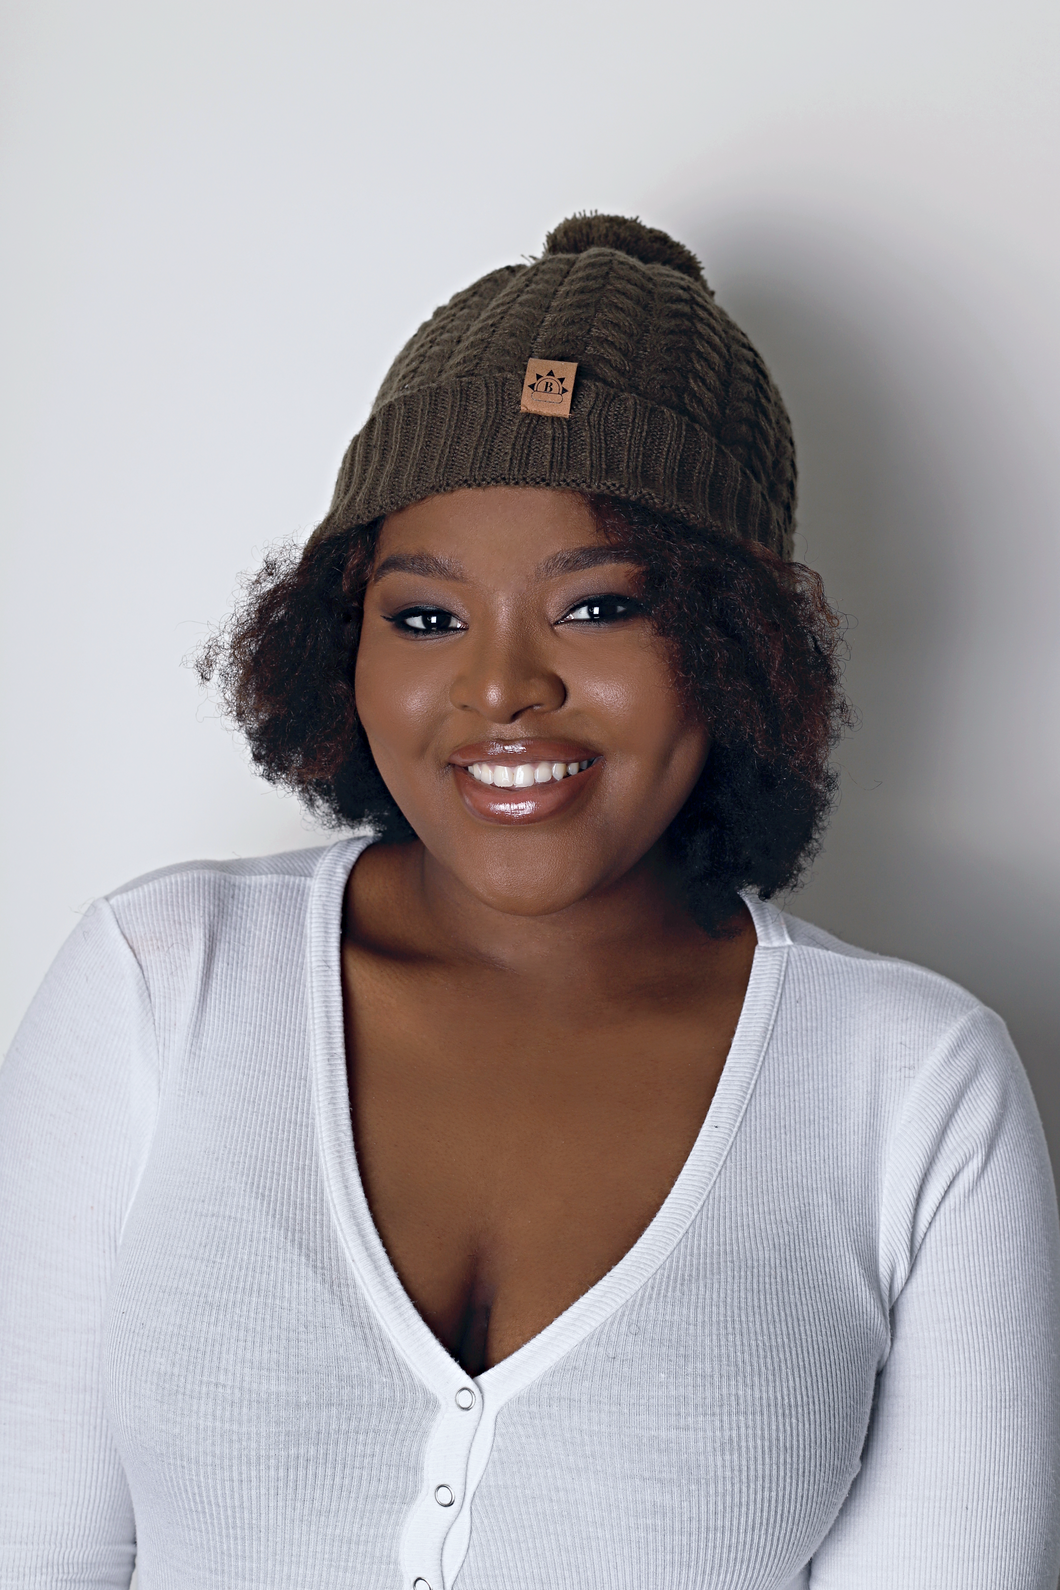 Olive Satin Lined Bobble Hat - Black Sunrise UK Satin Lined Hats,. Satin lined Beanie, Hoodies. For children, adults, babies. For those with curly natural hair, sensitive scalps and fragile curls.